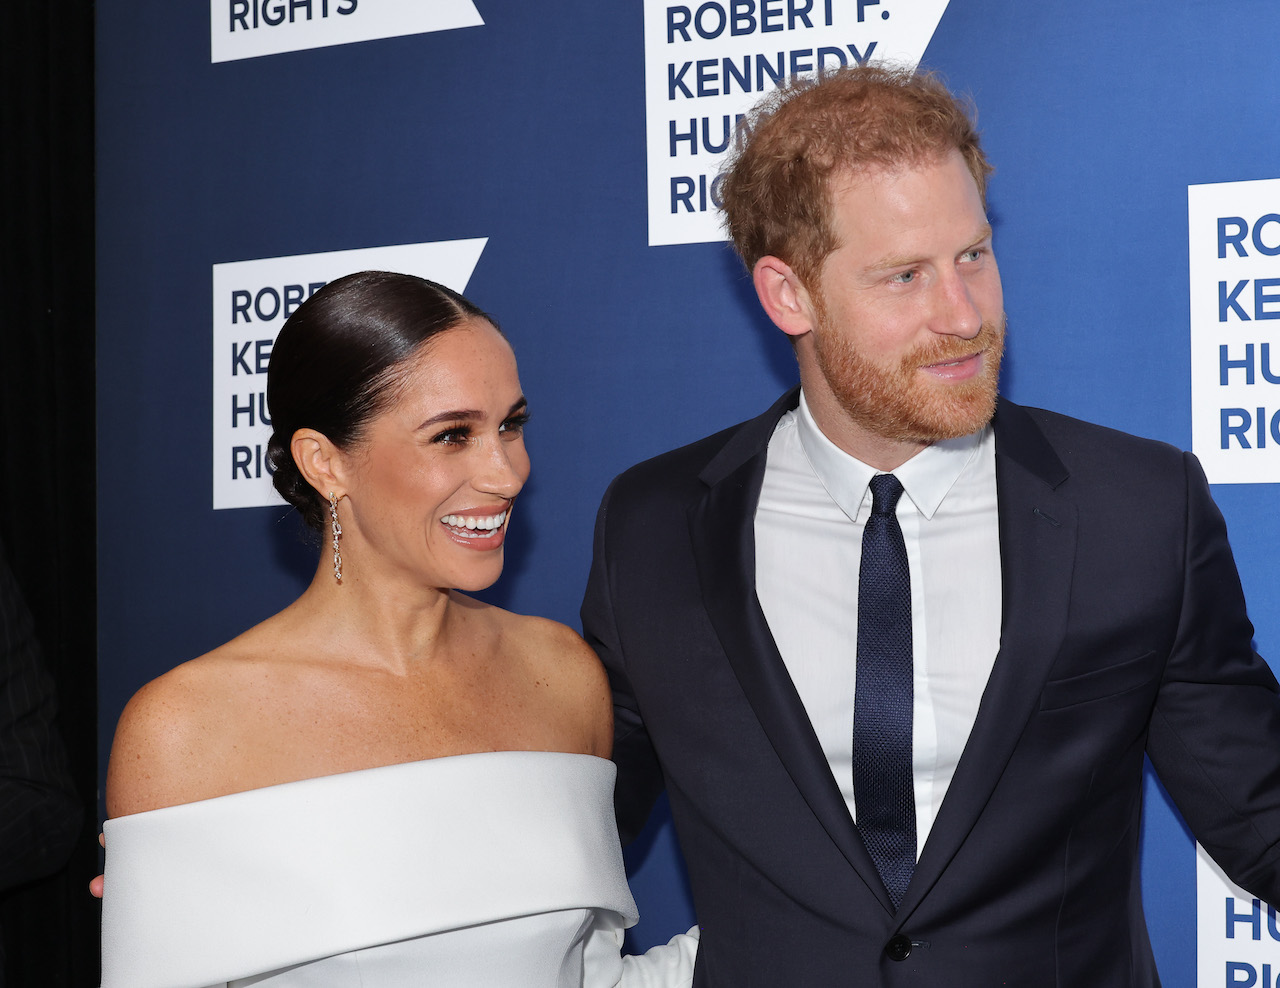 Meghan Markle and Prince Harry smile while attending event